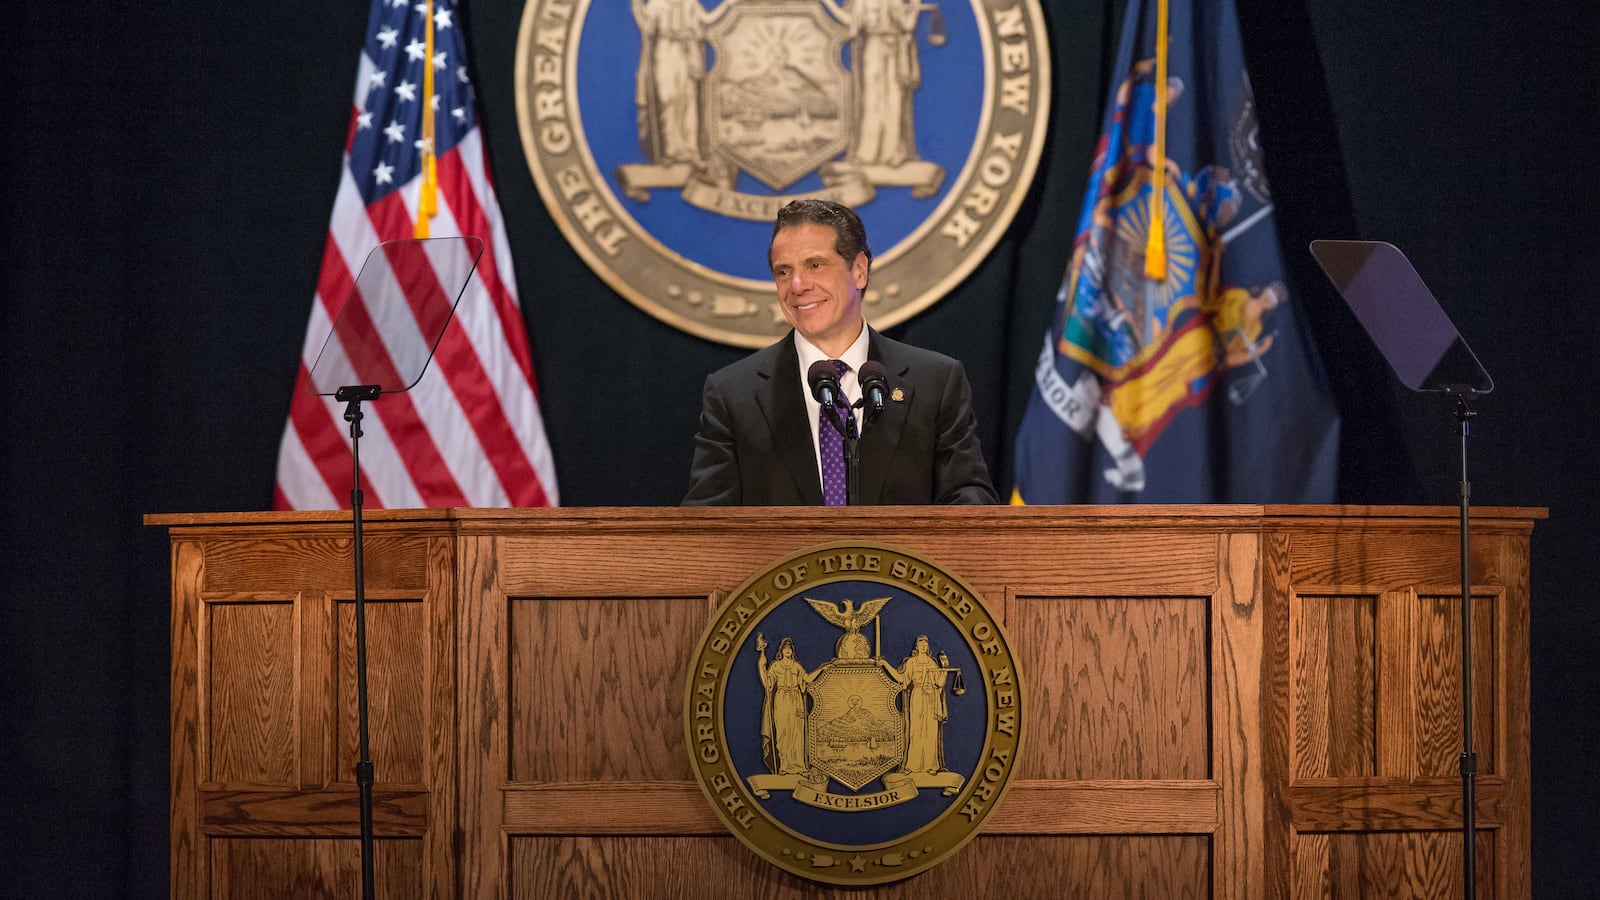 Governor Andrew Cuomo during his 2018 State of the State address.